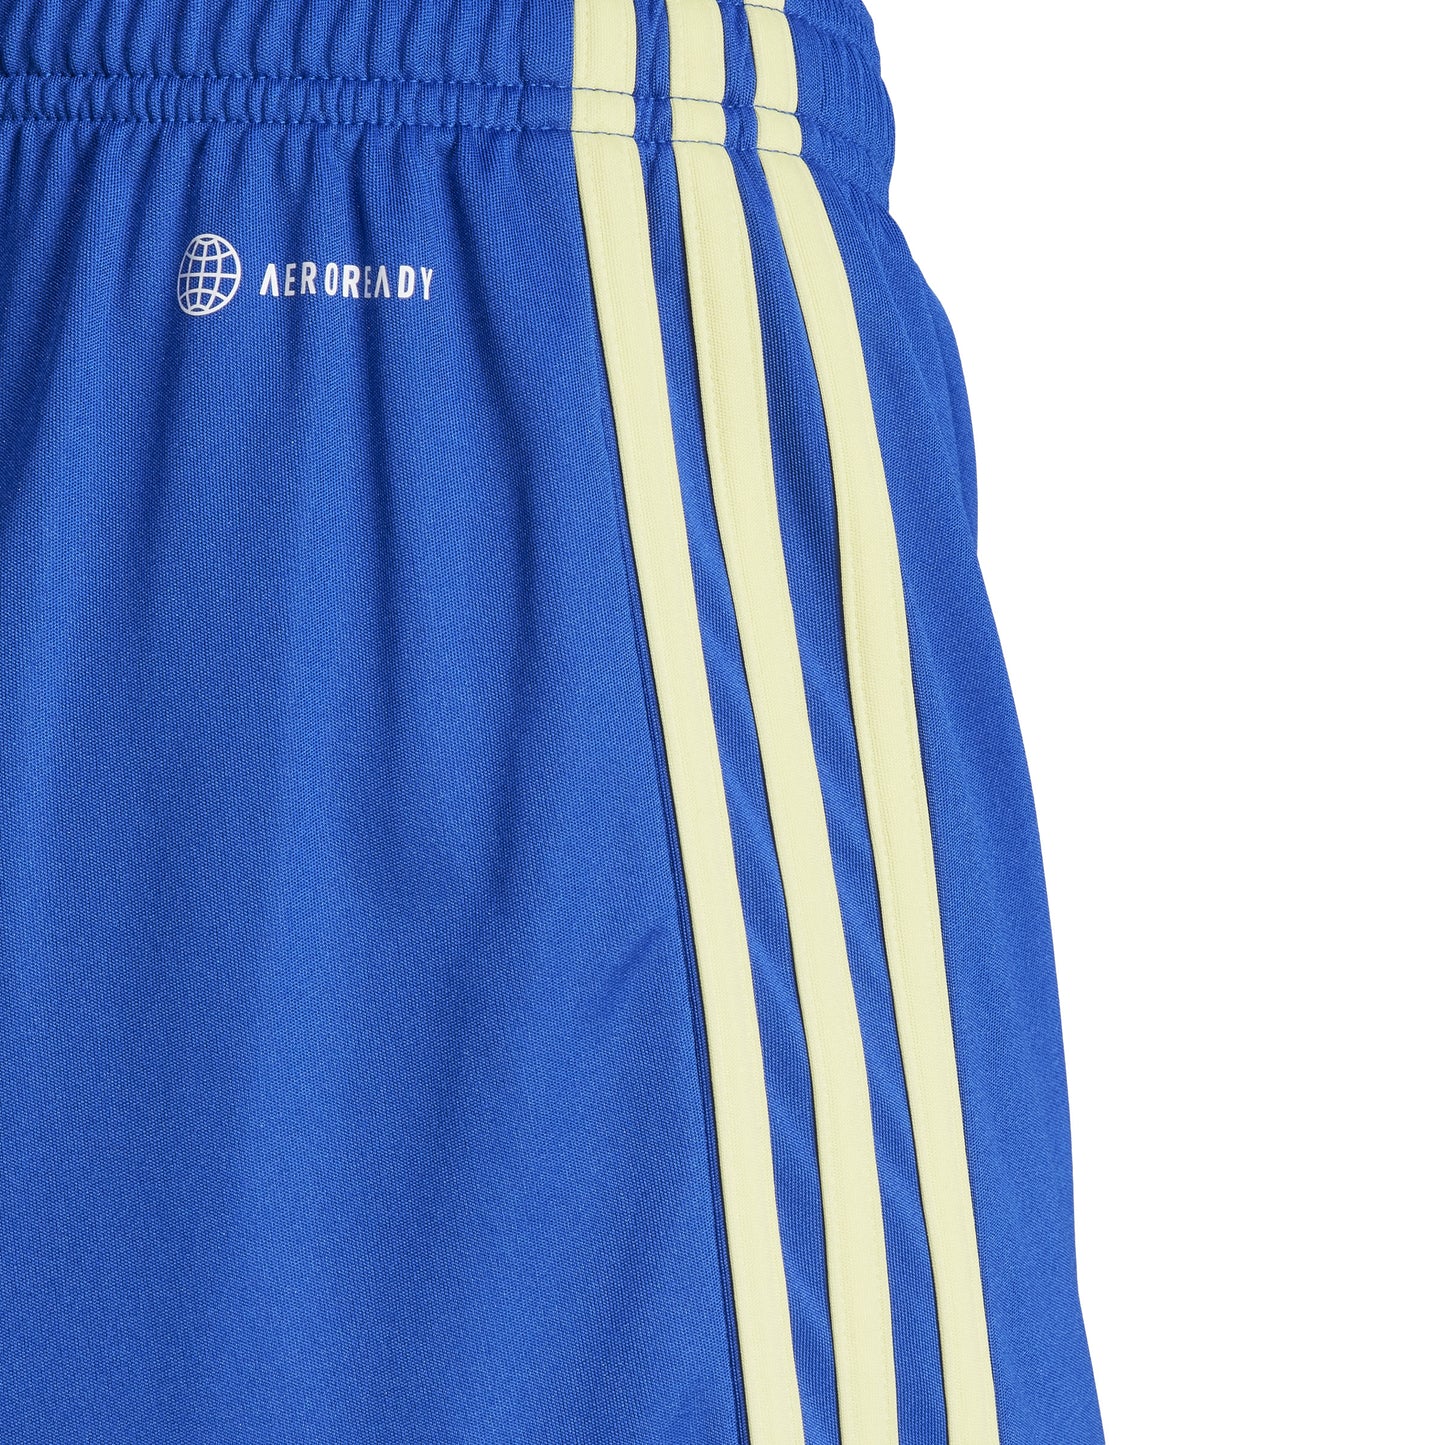 Sweden 2023 Away Curved Fit Football Shorts